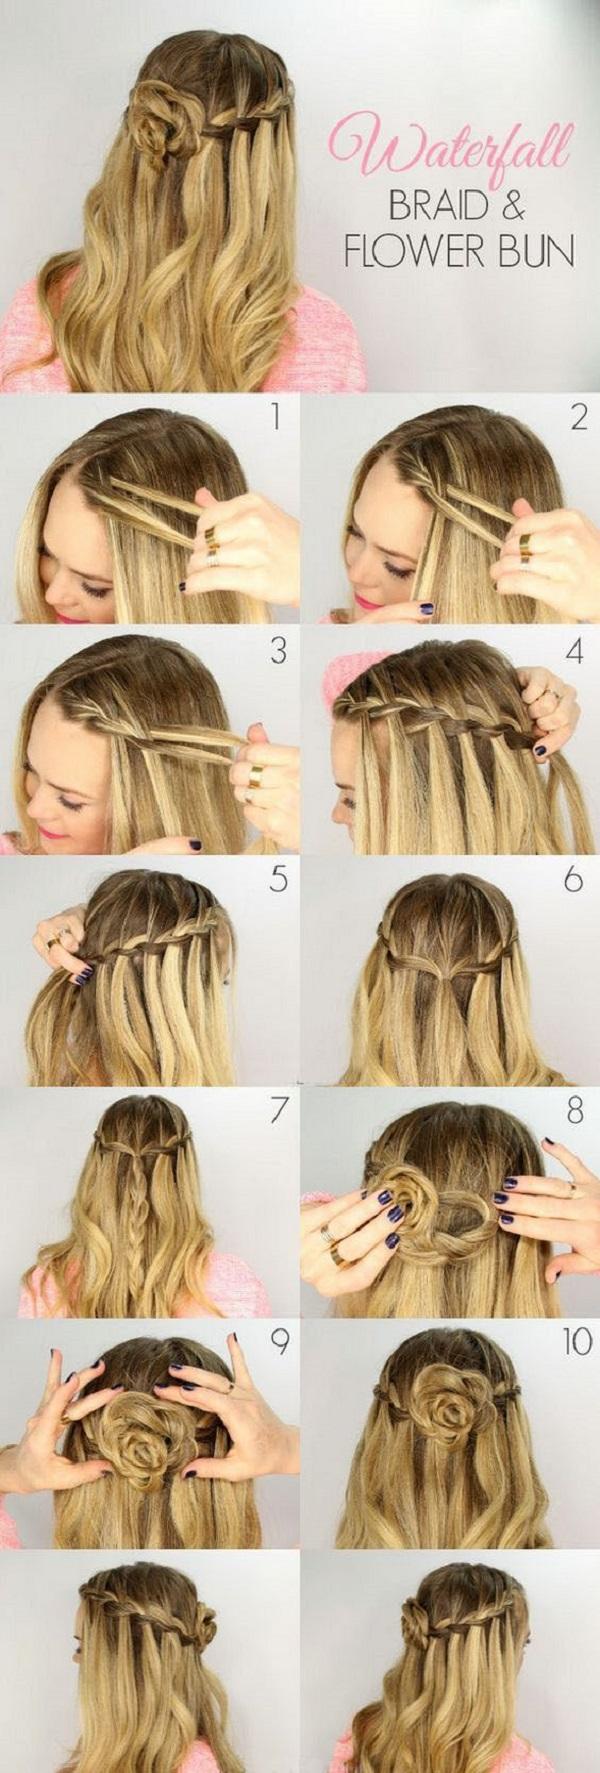 Easy Hairstyles for Short to Medium Length Hair - See Mama Go